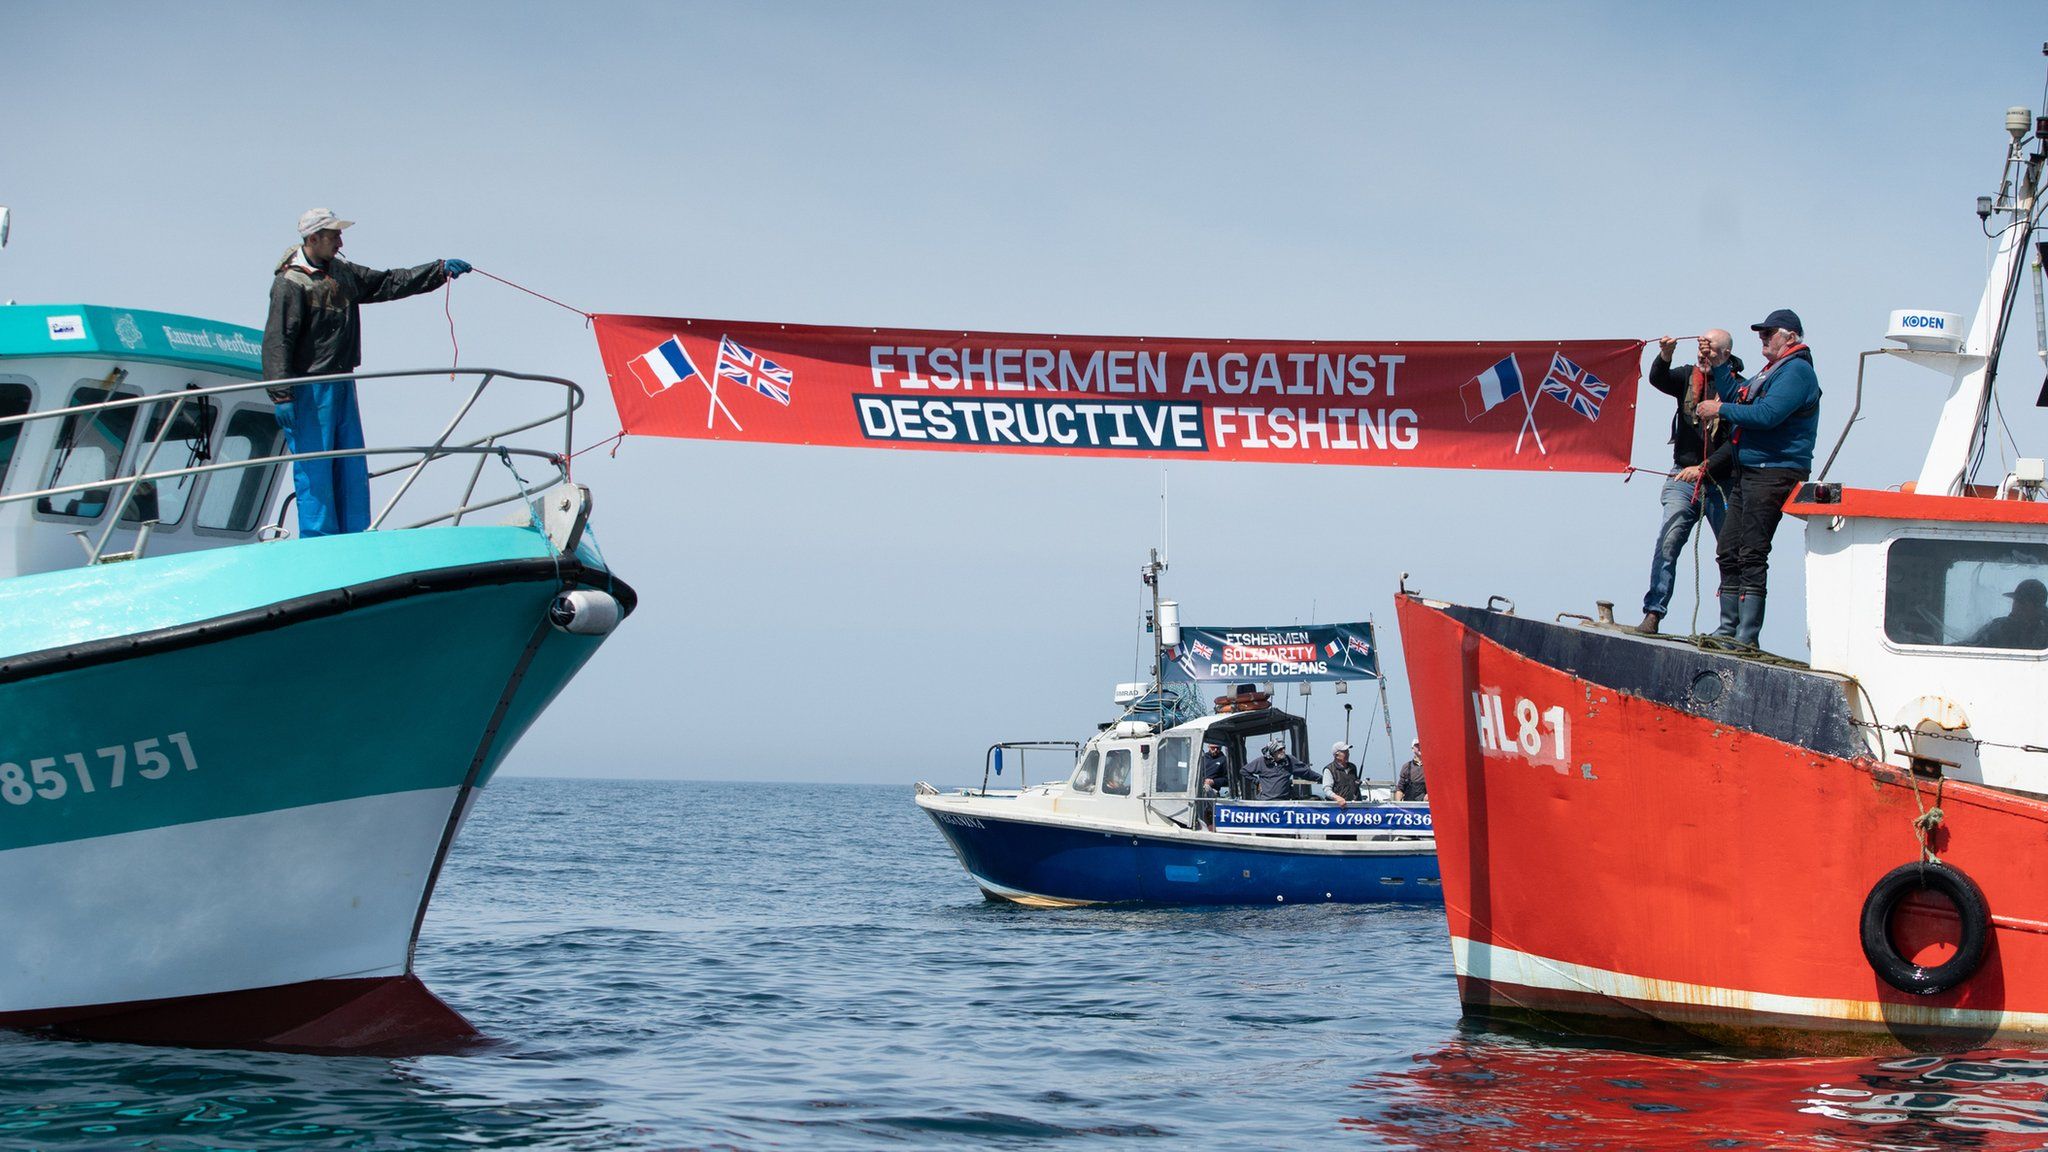 A banner being held between two boats in the Channel